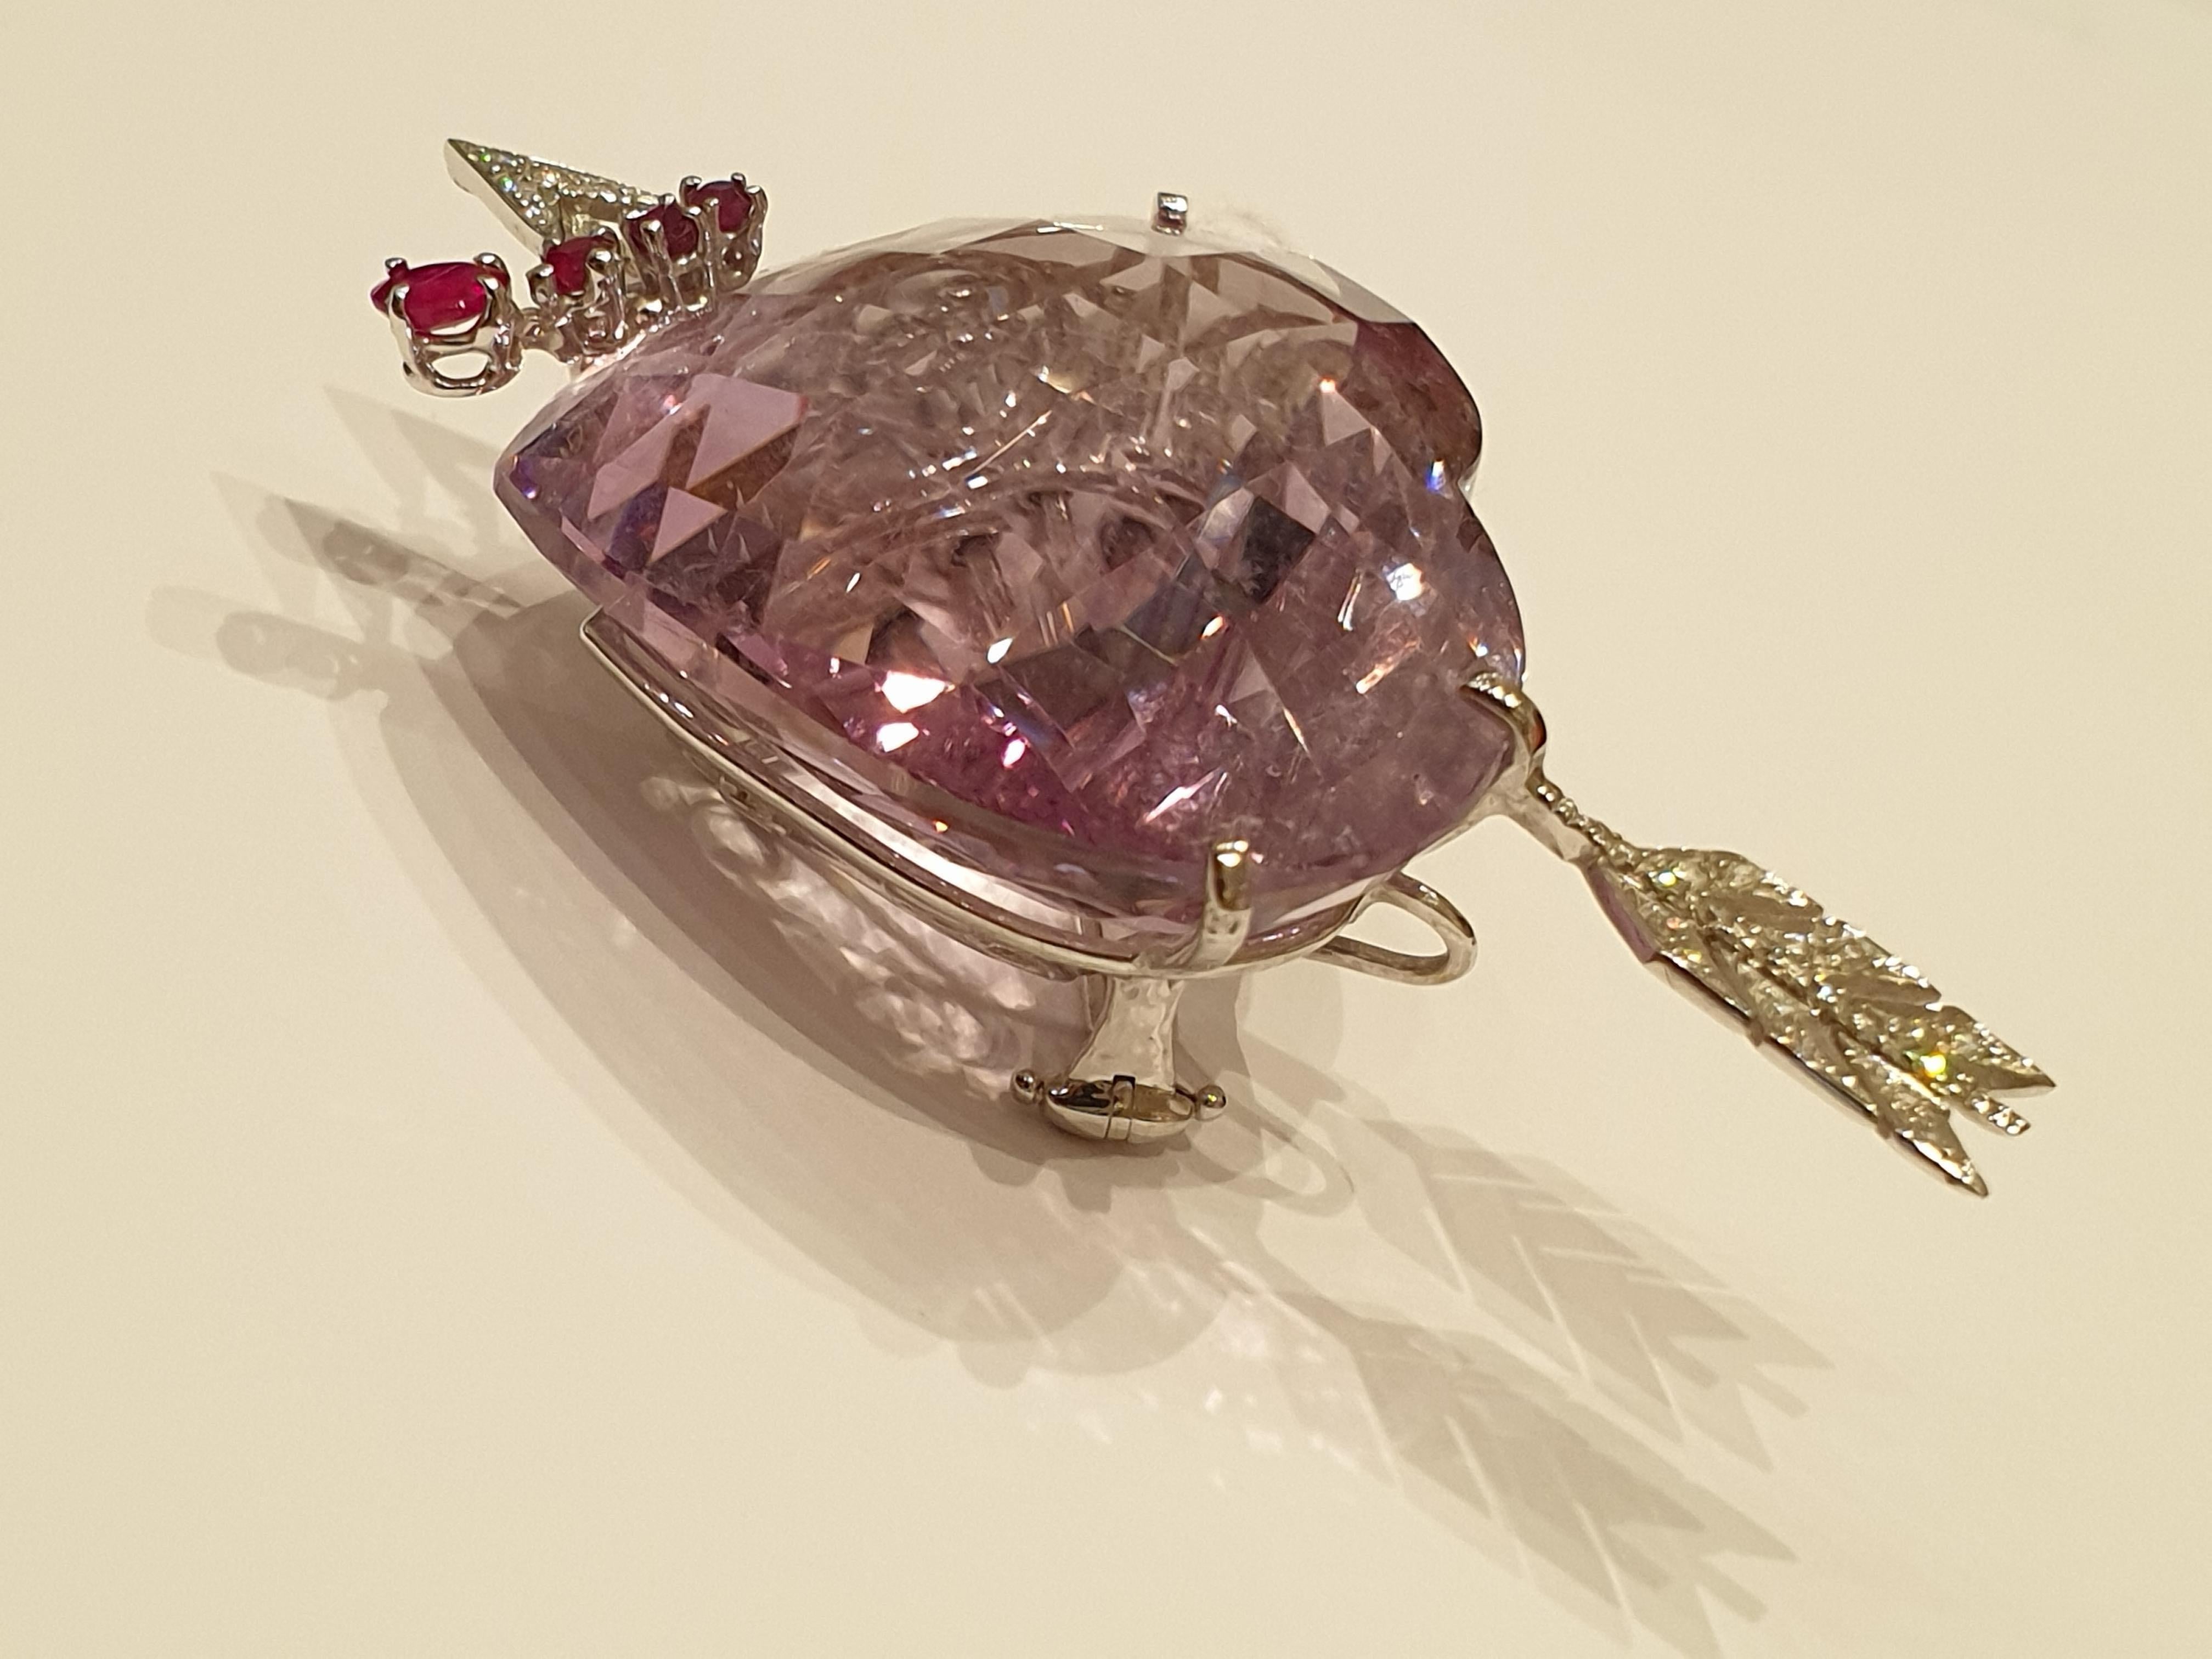 Women's Amethyst Gold Brooch in the Form of a Pierced Heart with Diamonds and Rubies